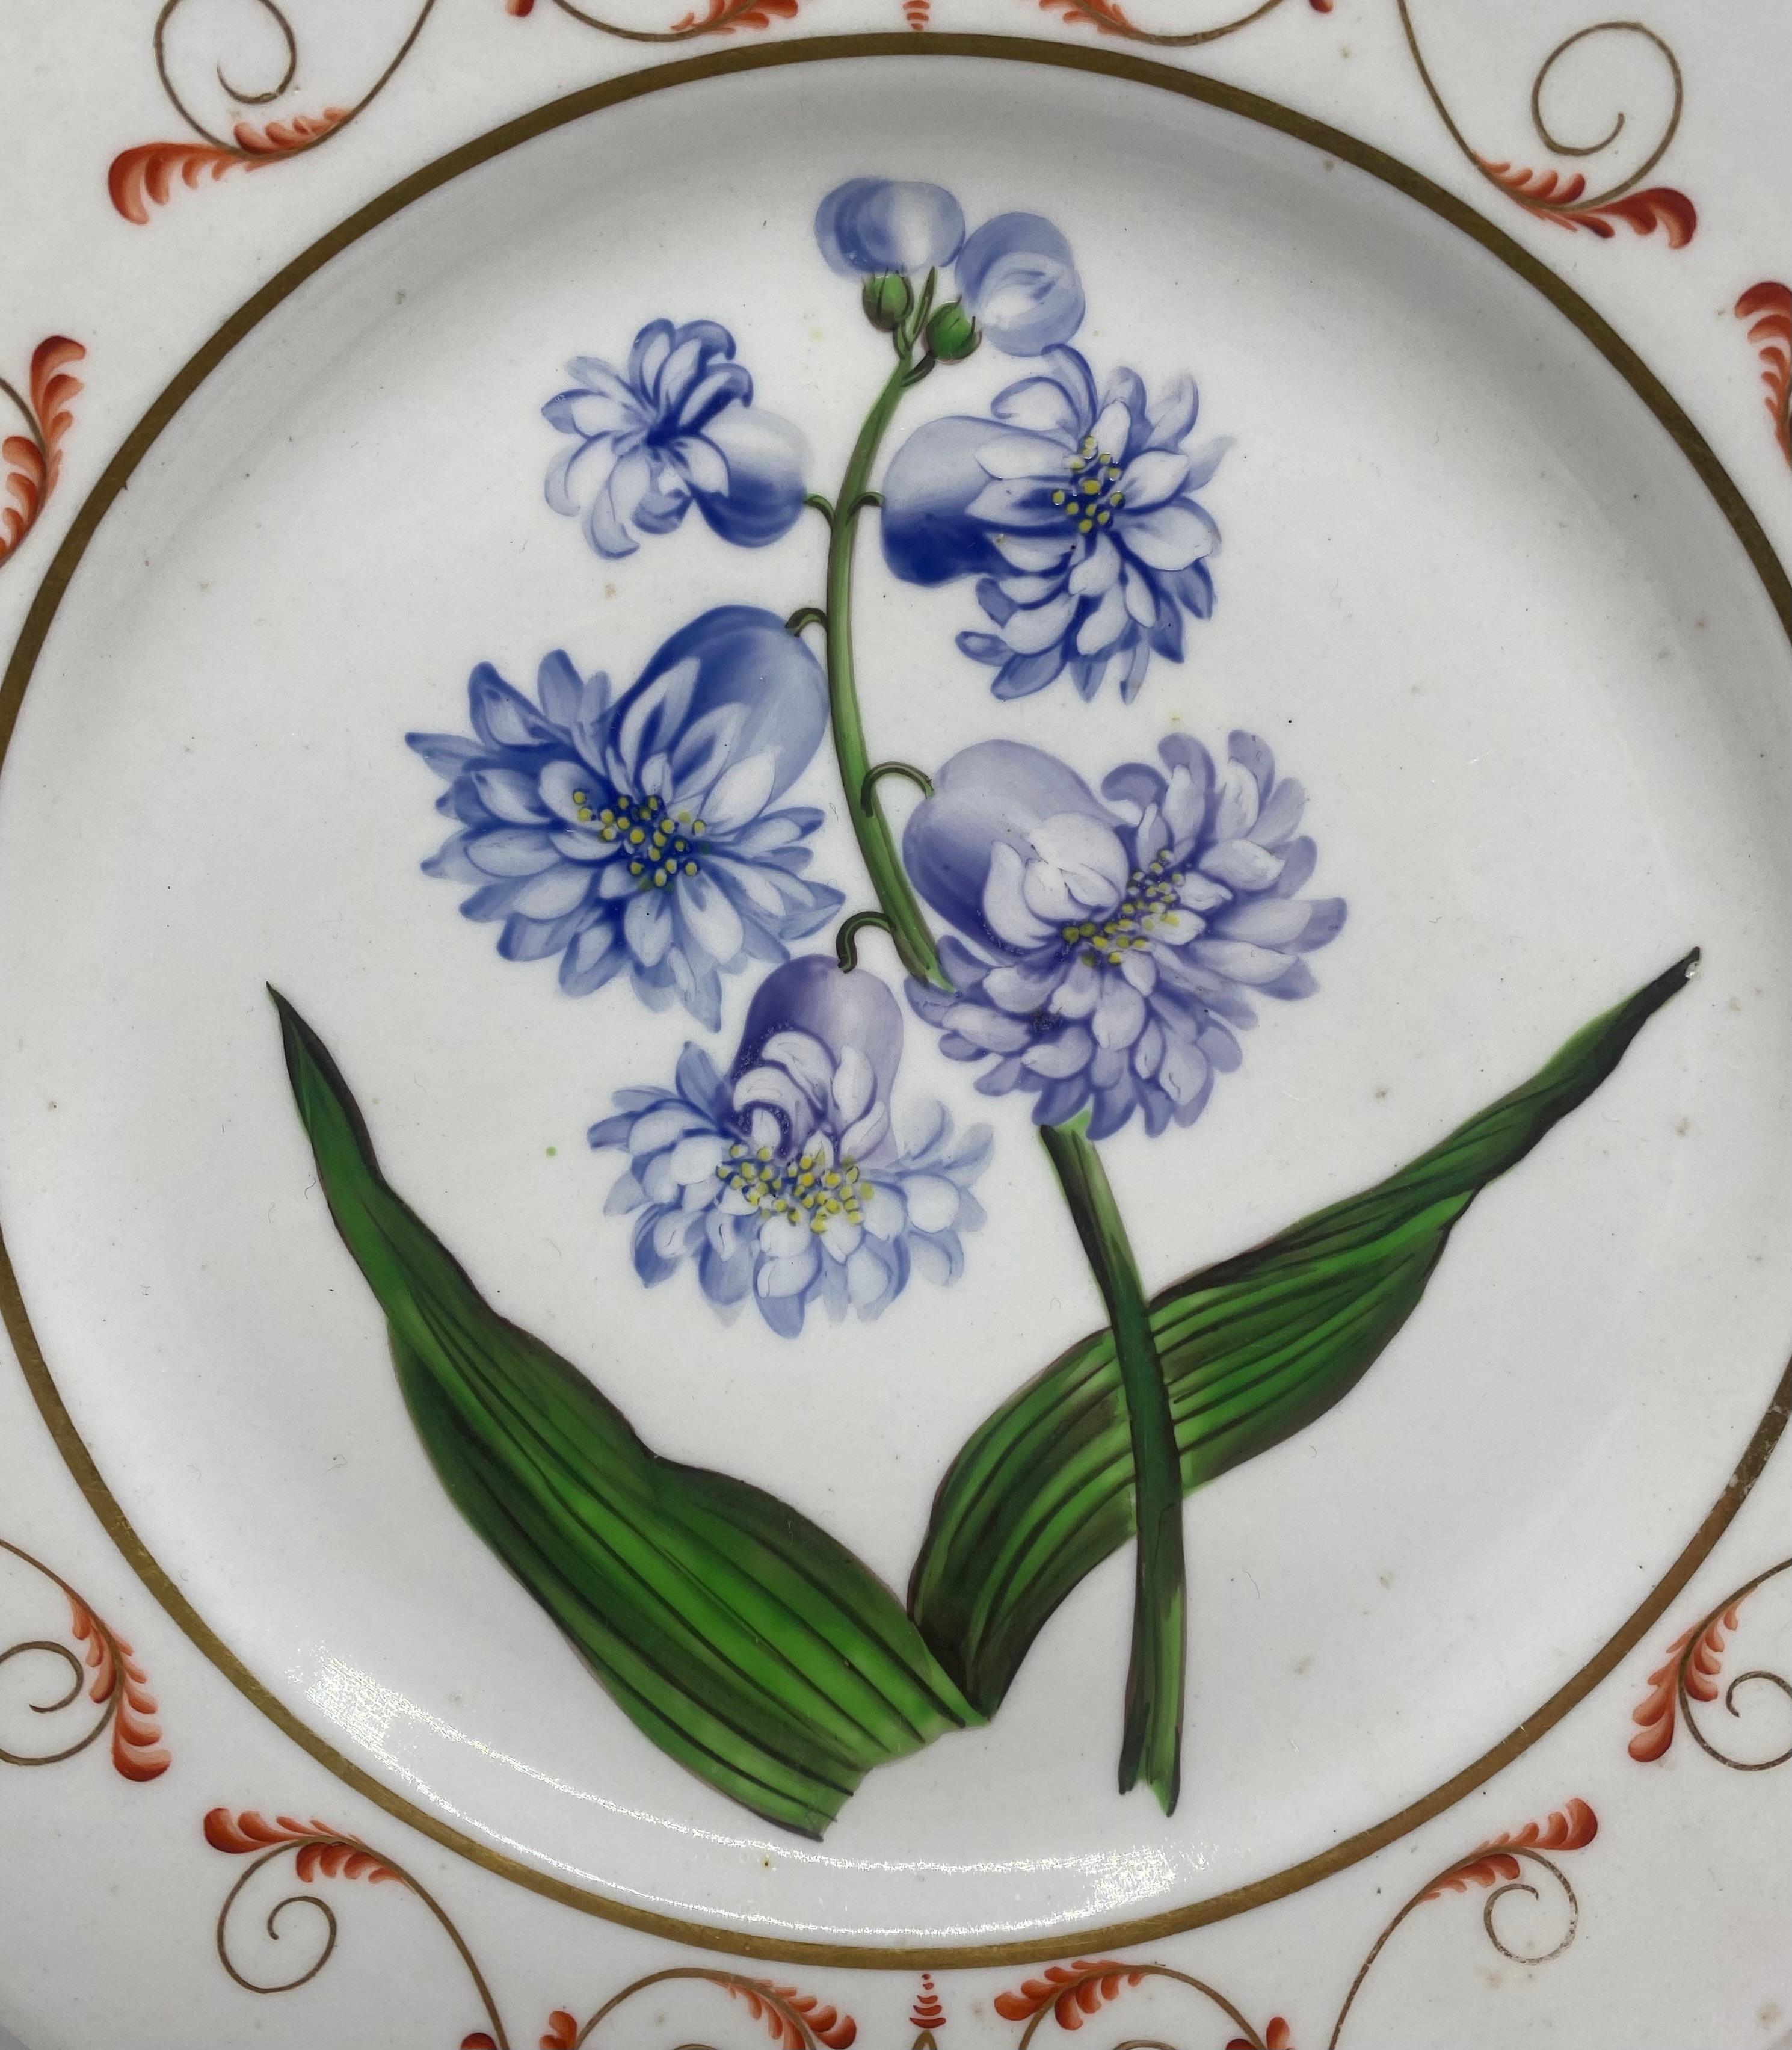 English porcelain botanical dish, ‘Hyacinth’, c. 1800. Hand painted to the centre, with a titled study of a Hyacinth. The border with a stylised Classical leaf scroll motif, in iron red and gilt.
Titled to the reverse in blue script